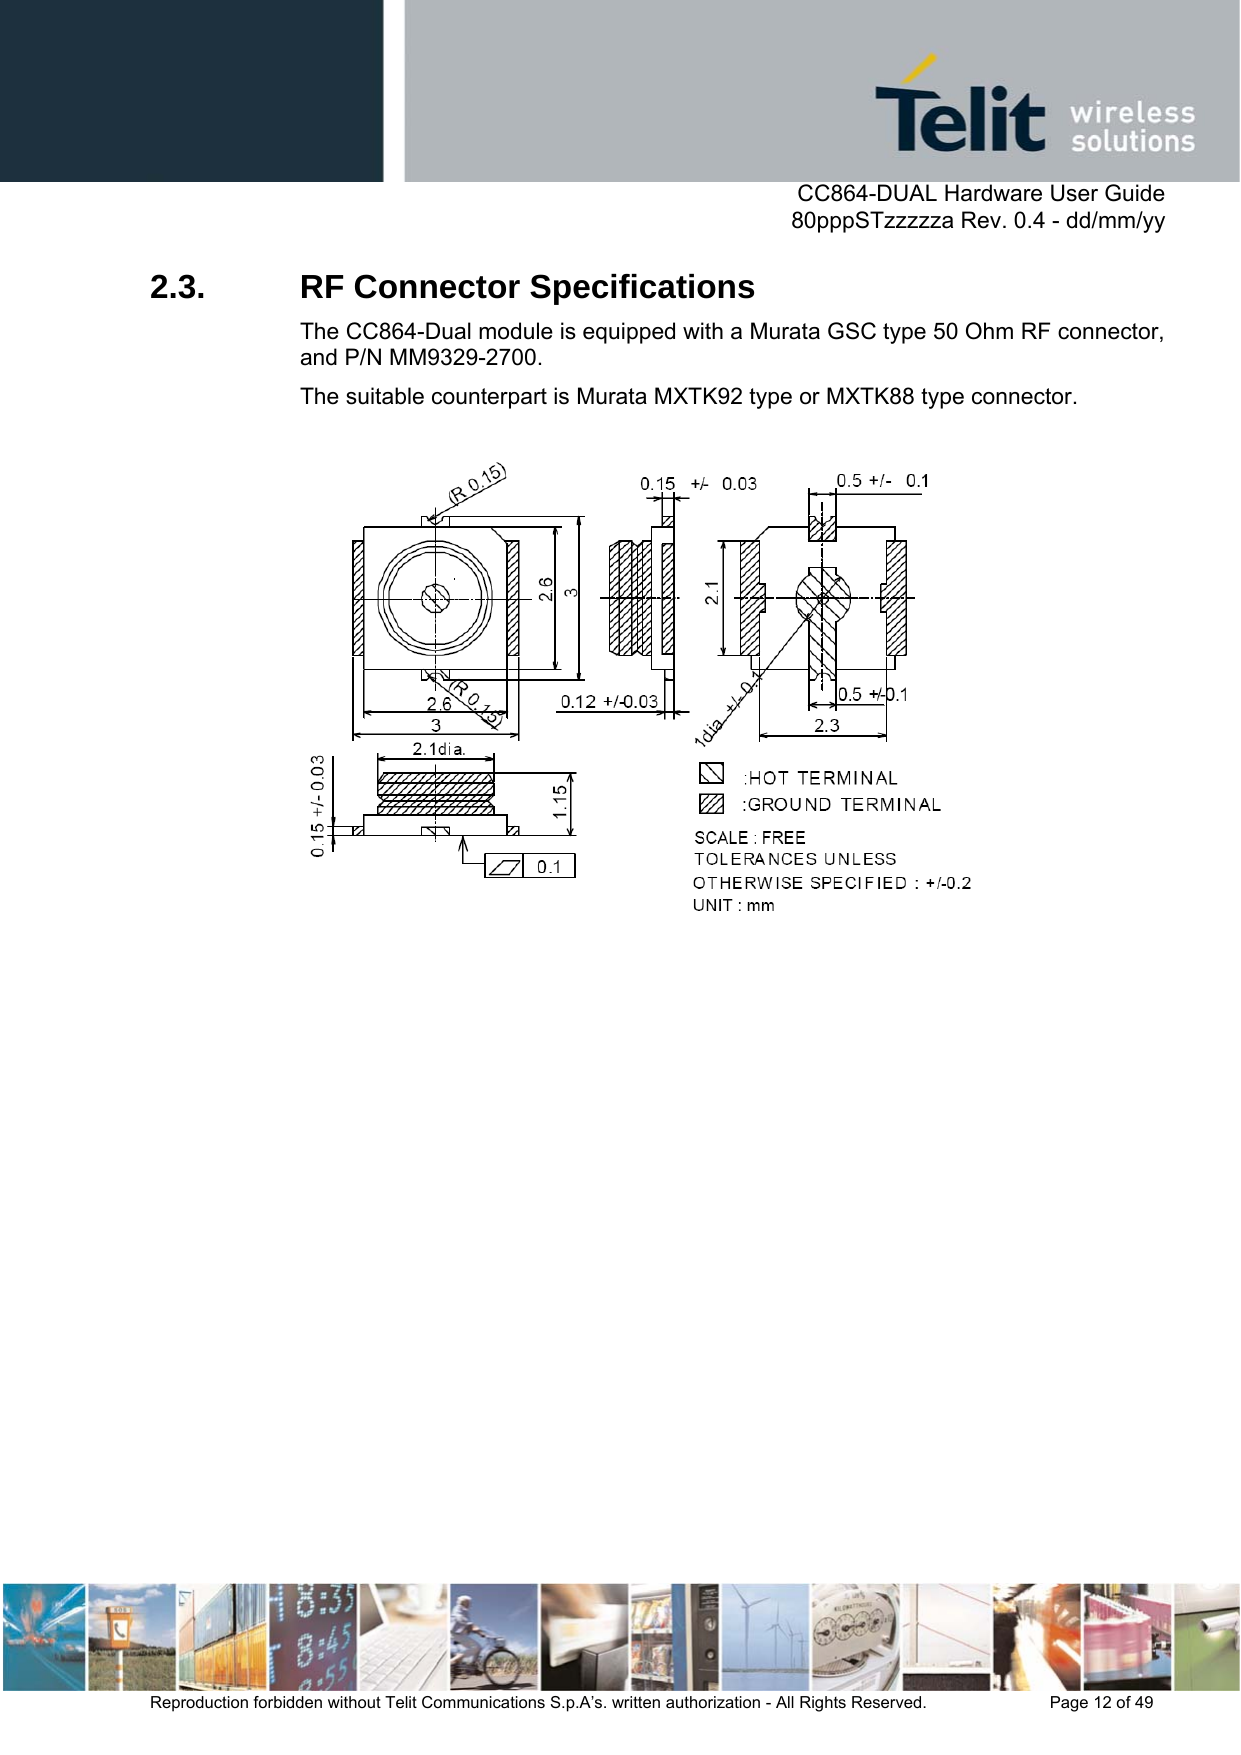      CC864-DUAL Hardware User Guide   80pppSTzzzzza Rev. 0.4 - dd/mm/yy   Reproduction forbidden without Telit Communications S.p.A’s. written authorization - All Rights Reserved.    Page 12 of 49  2.3.  RF Connector Specifications The CC864-Dual module is equipped with a Murata GSC type 50 Ohm RF connector, and P/N MM9329-2700.  The suitable counterpart is Murata MXTK92 type or MXTK88 type connector.   